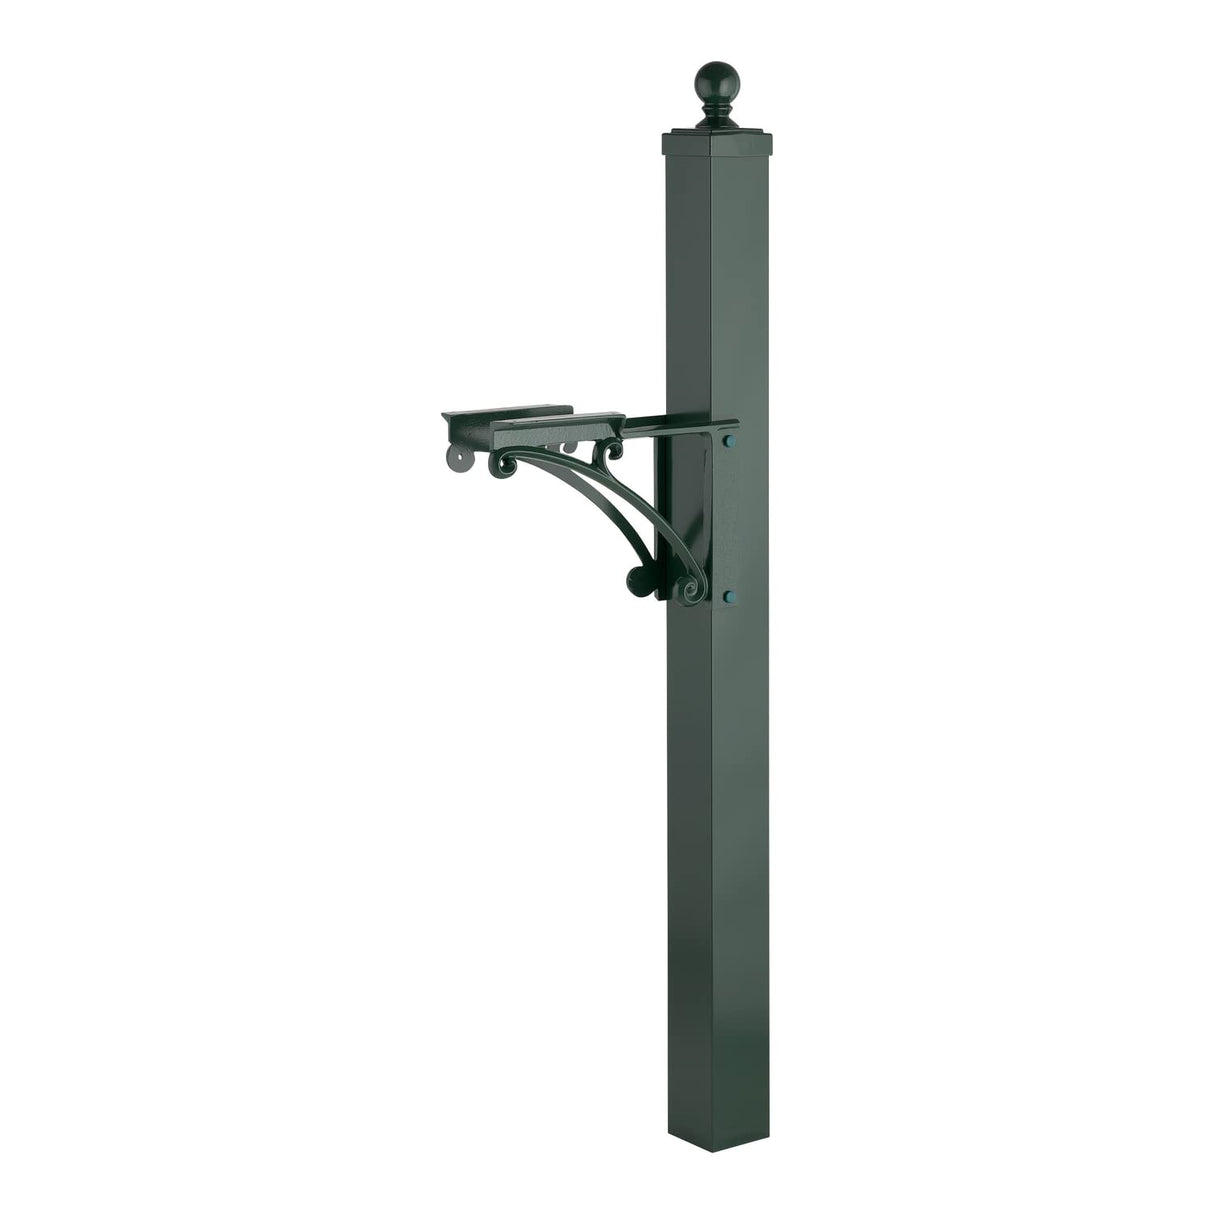 Whitehall 16062 - Deluxe Post & Brackets w/ball finial - Green